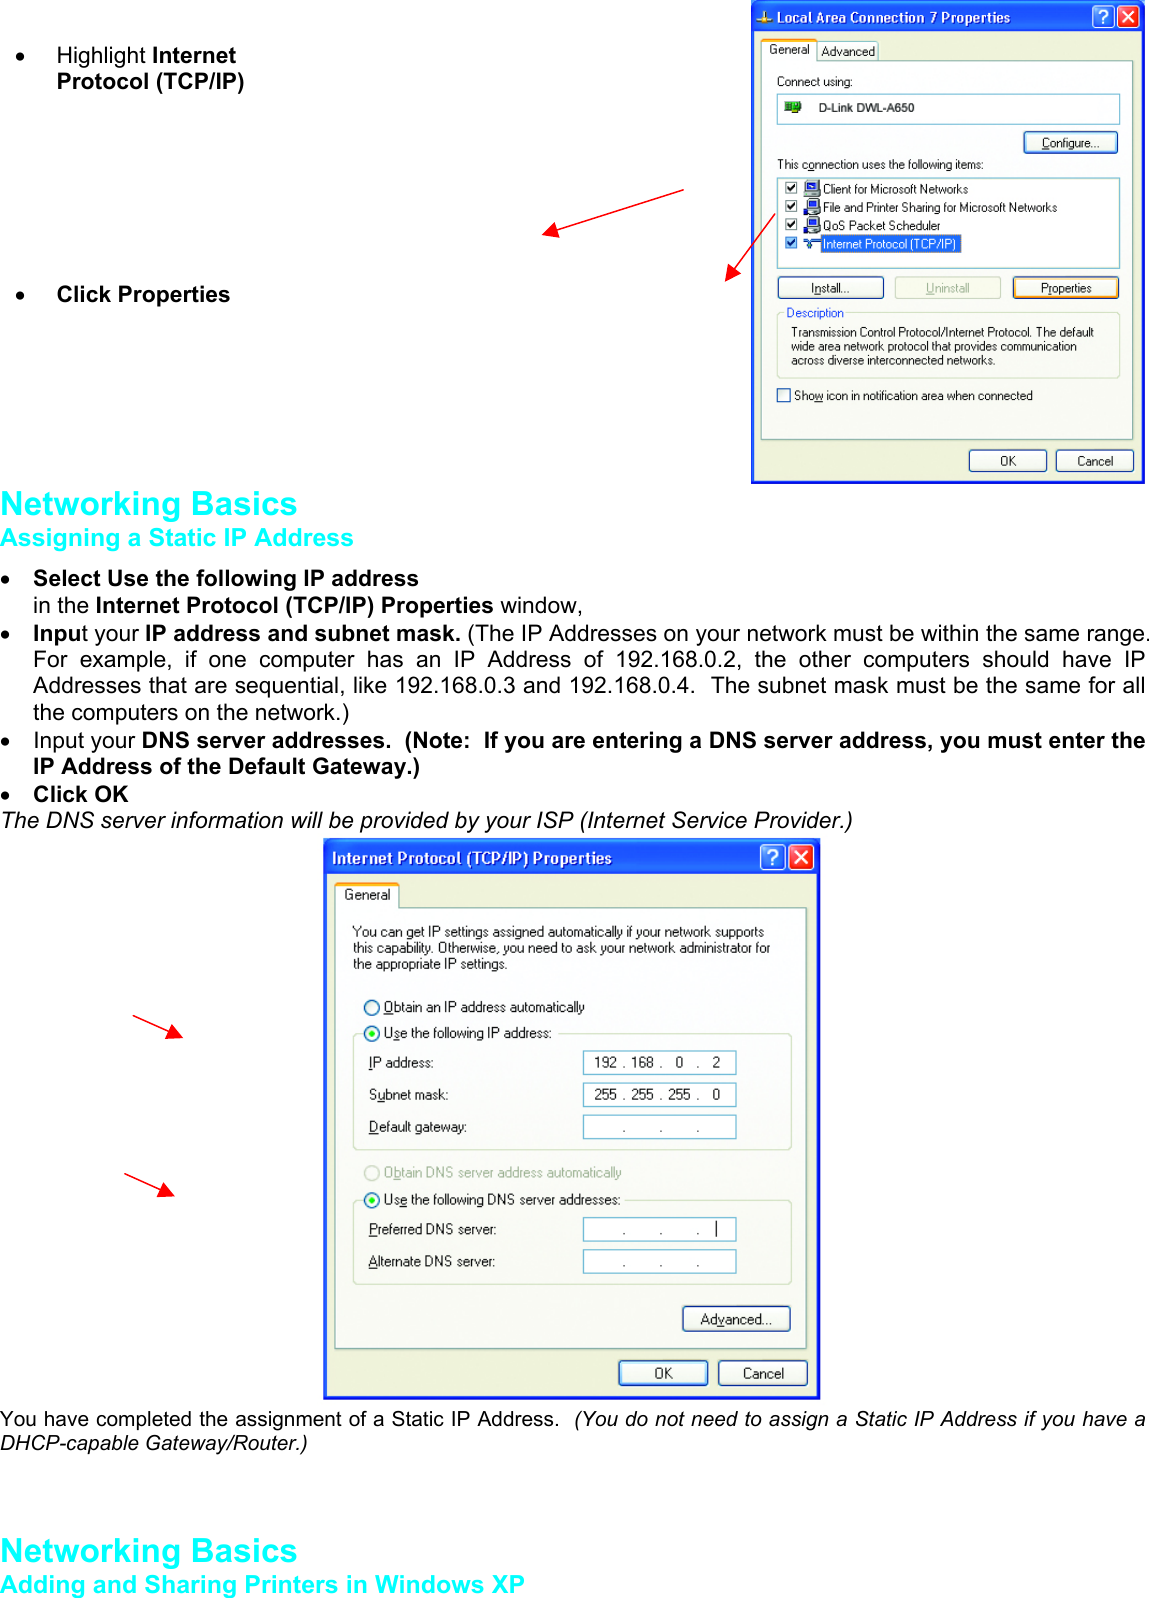 Networking BasicsAssigning a Static IP Address• Select Use the following IP addressin the Internet Protocol (TCP/IP) Properties window,• Input your IP address and subnet mask. (The IP Addresses on your network must be within the same range.For example, if one computer has an IP Address of 192.168.0.2, the other computers should have IPAddresses that are sequential, like 192.168.0.3 and 192.168.0.4.  The subnet mask must be the same for allthe computers on the network.)• Input your DNS server addresses.  (Note:  If you are entering a DNS server address, you must enter theIP Address of the Default Gateway.)• Click OKThe DNS server information will be provided by your ISP (Internet Service Provider.)You have completed the assignment of a Static IP Address.  (You do not need to assign a Static IP Address if you have aDHCP-capable Gateway/Router.)Networking BasicsAdding and Sharing Printers in Windows XP• Highlight InternetProtocol (TCP/IP)• Click Properties